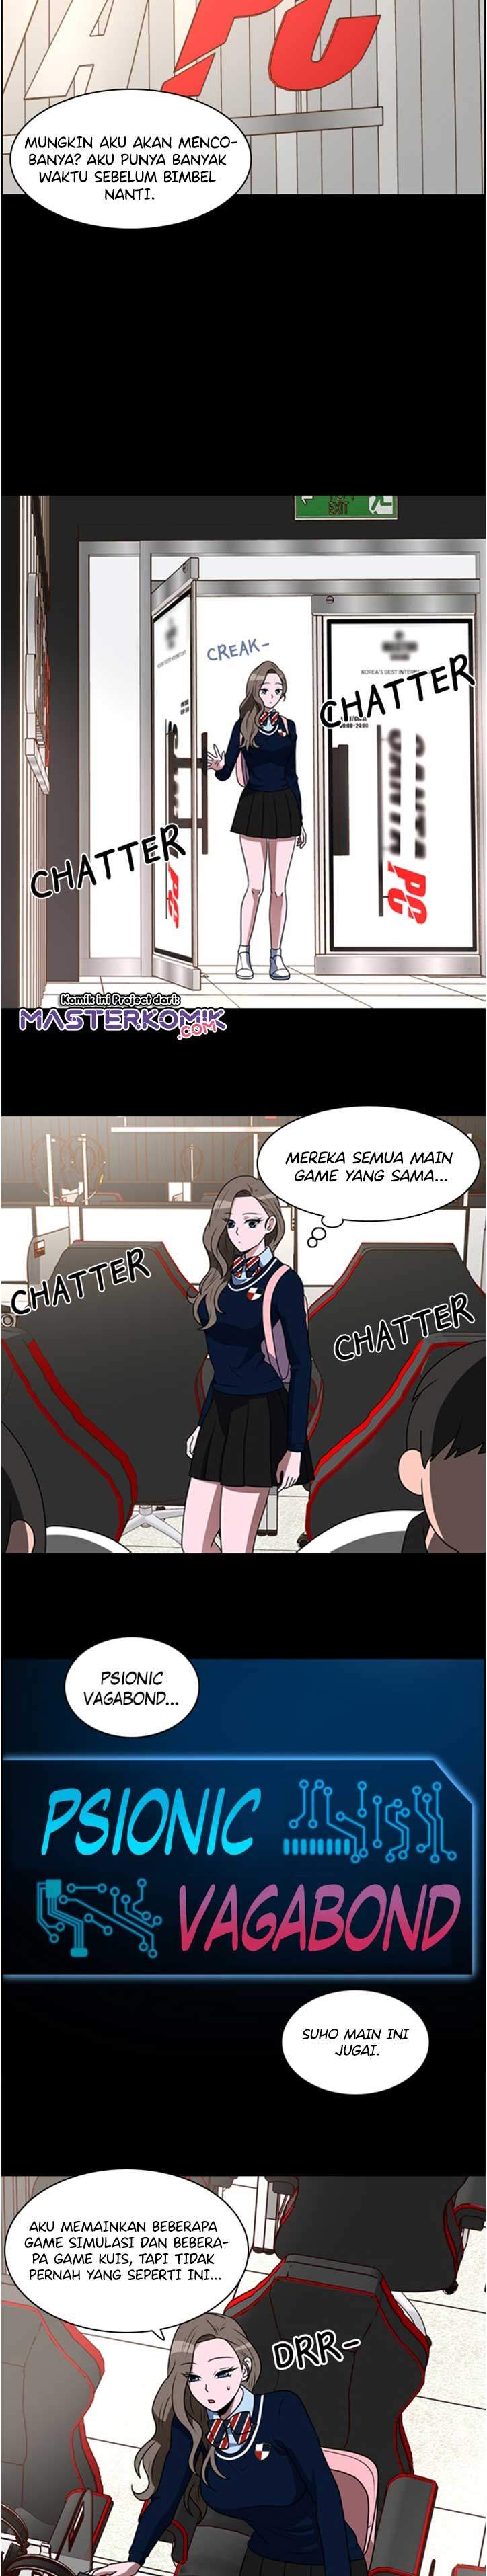 No Scope Chapter 48